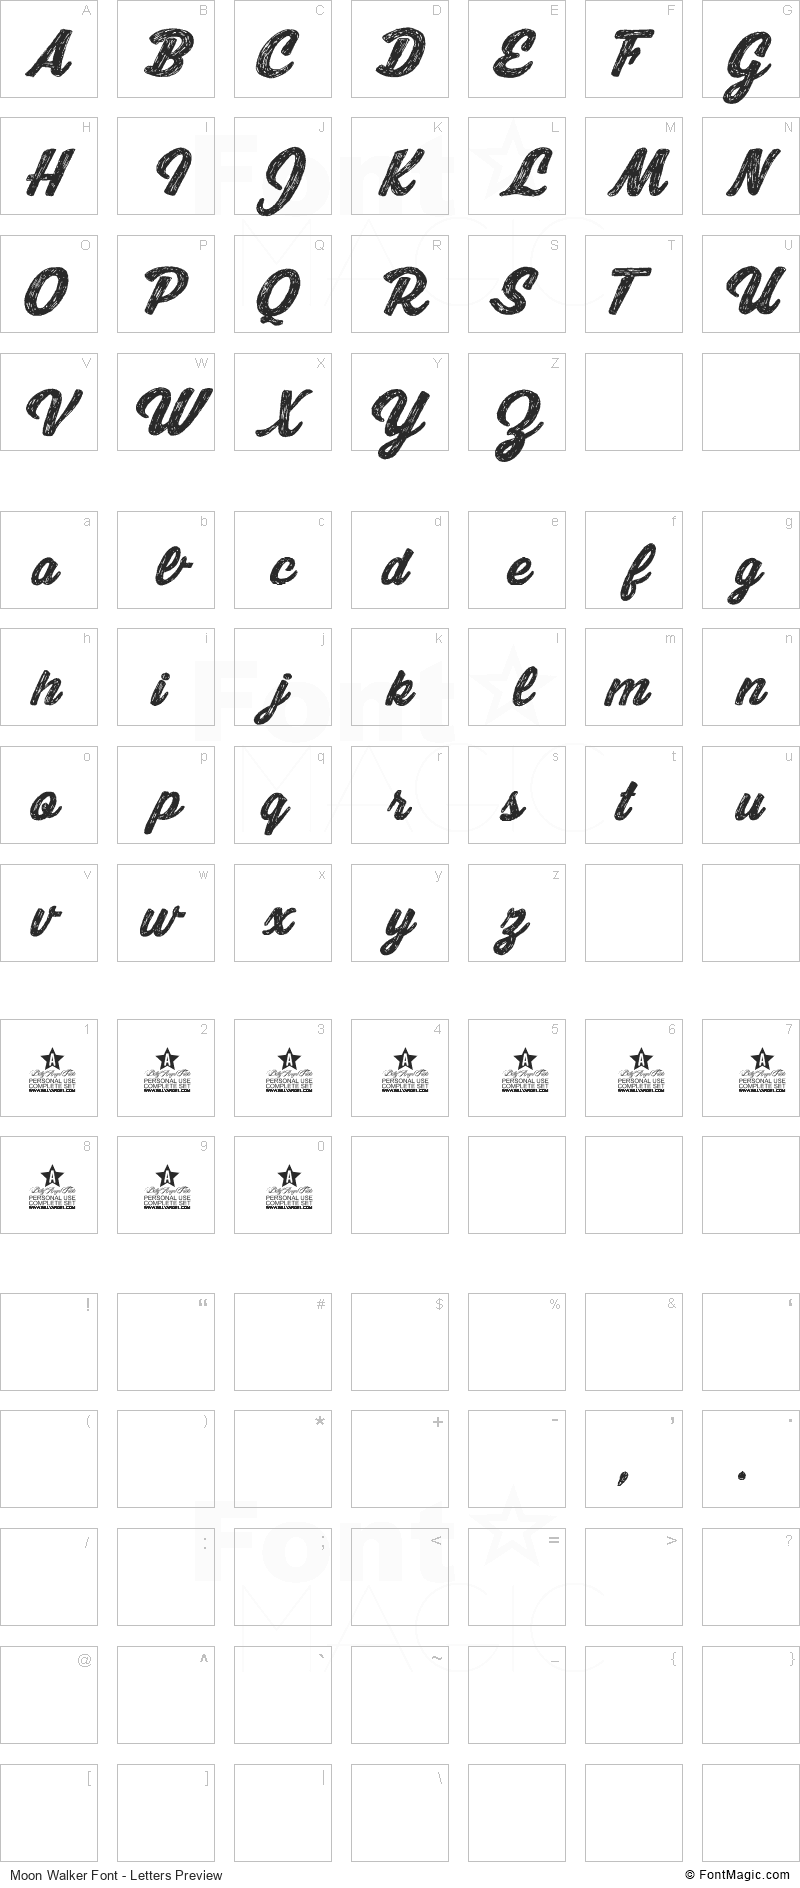 Moon Walker Font - All Latters Preview Chart